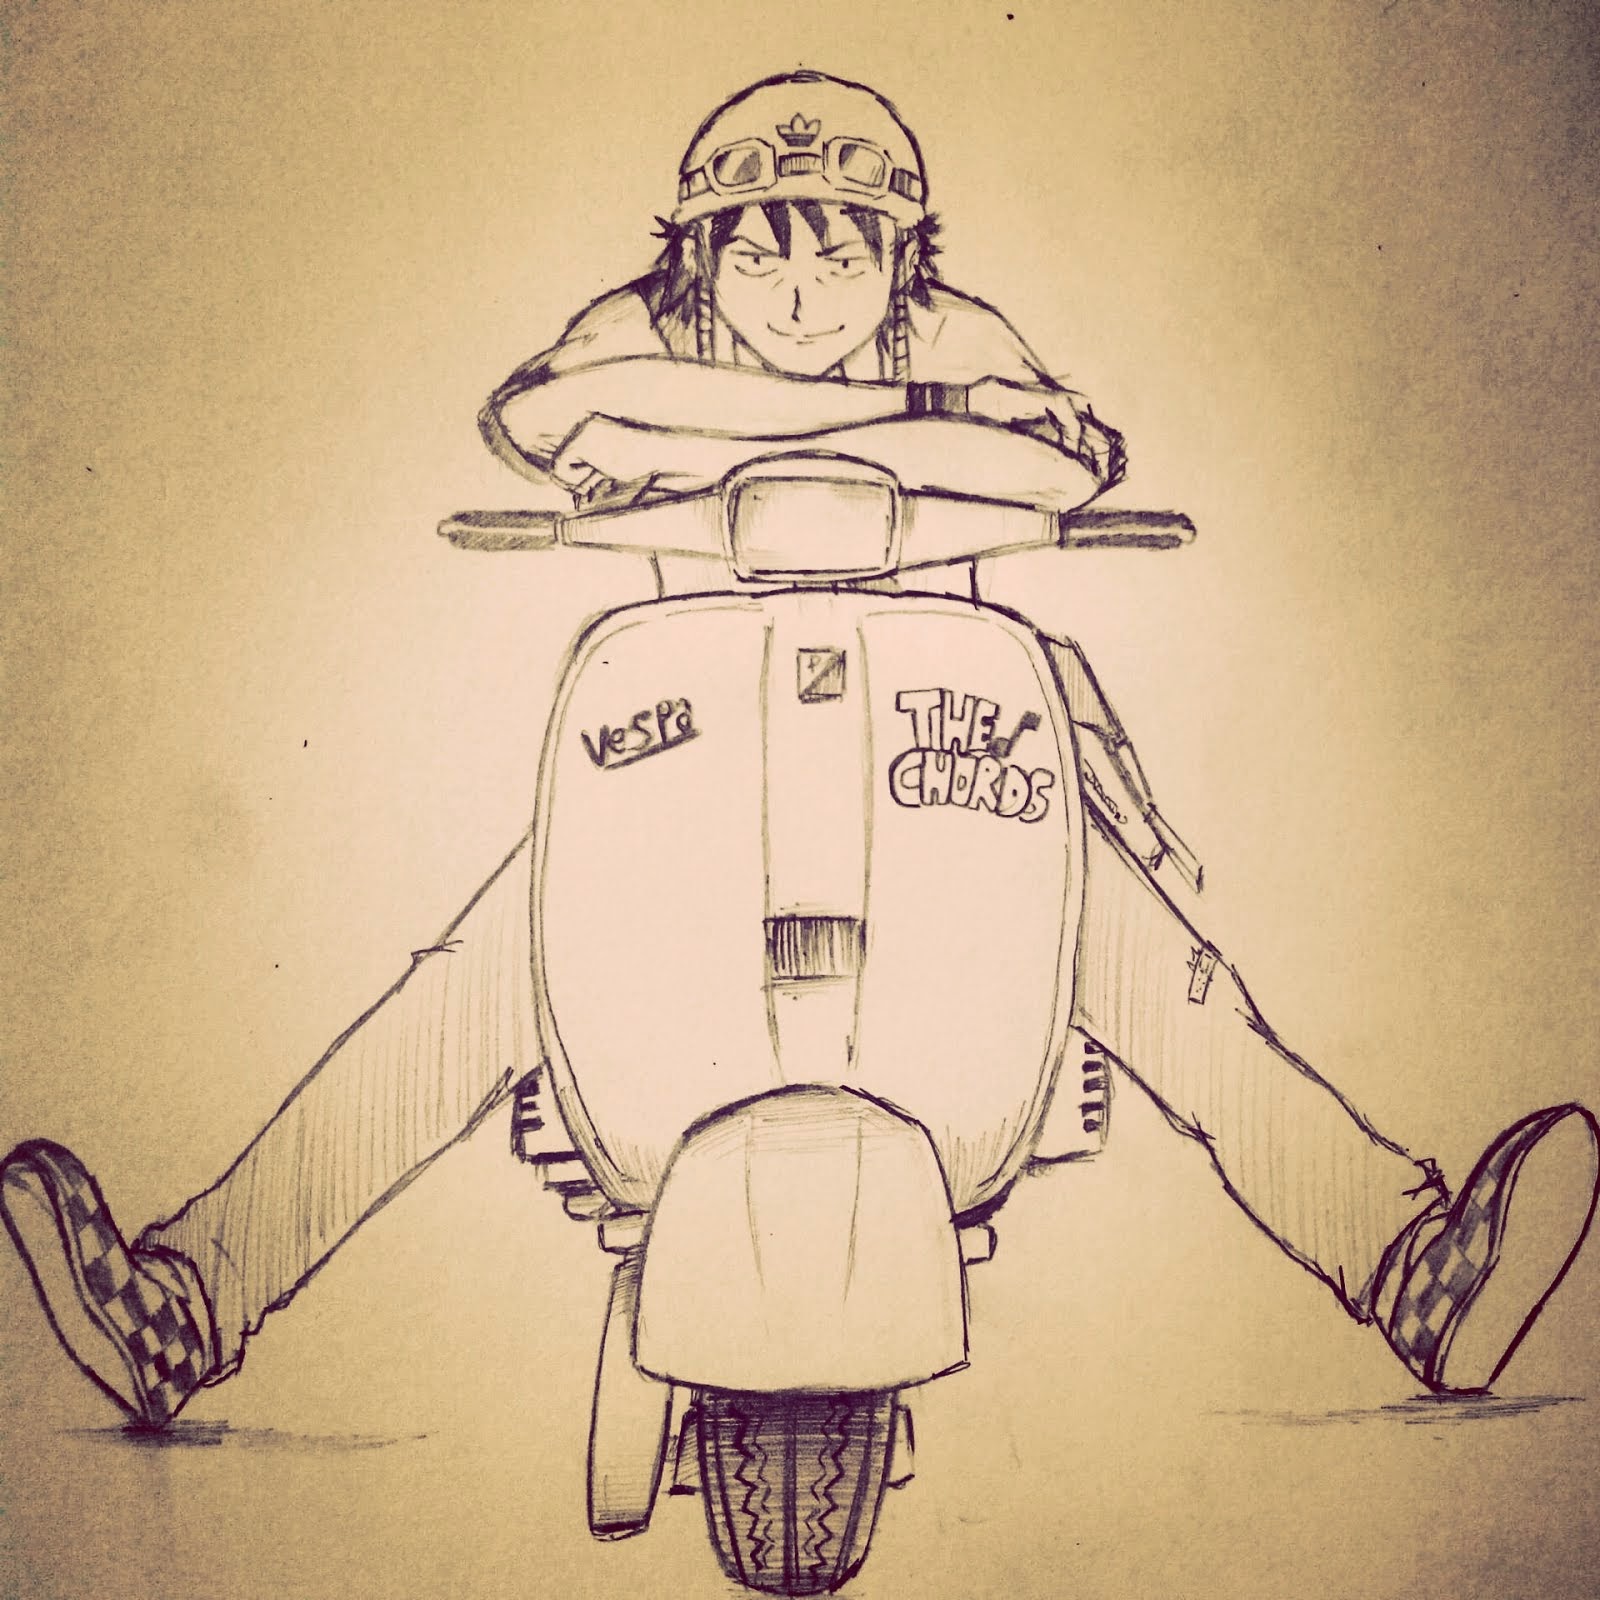 Vespa from The Chords